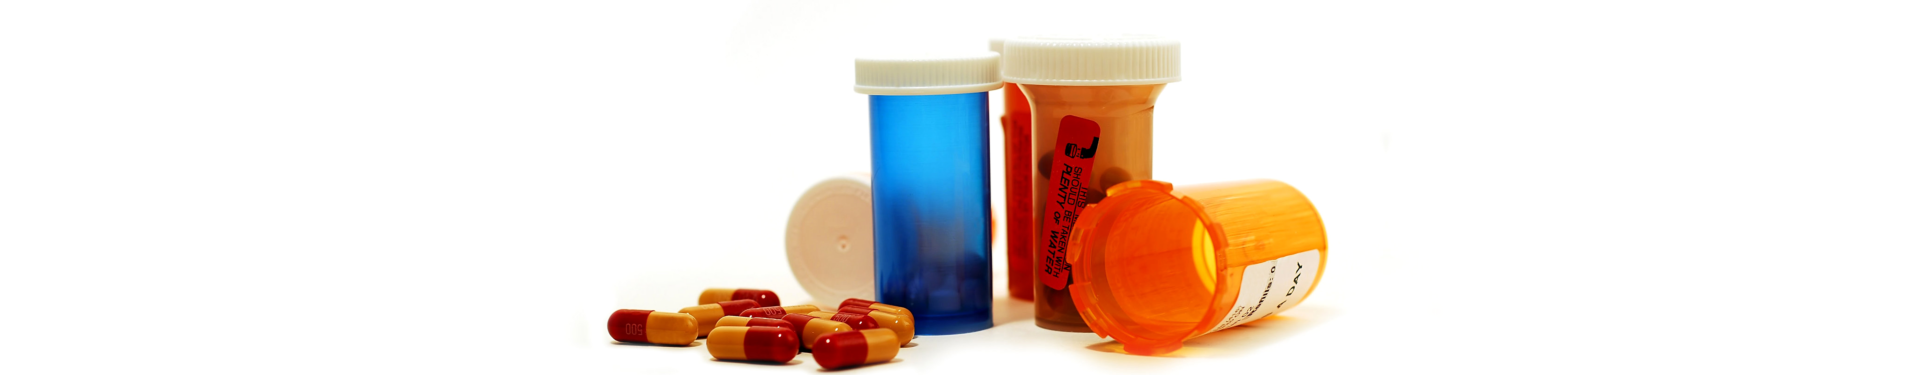 medicines in a container